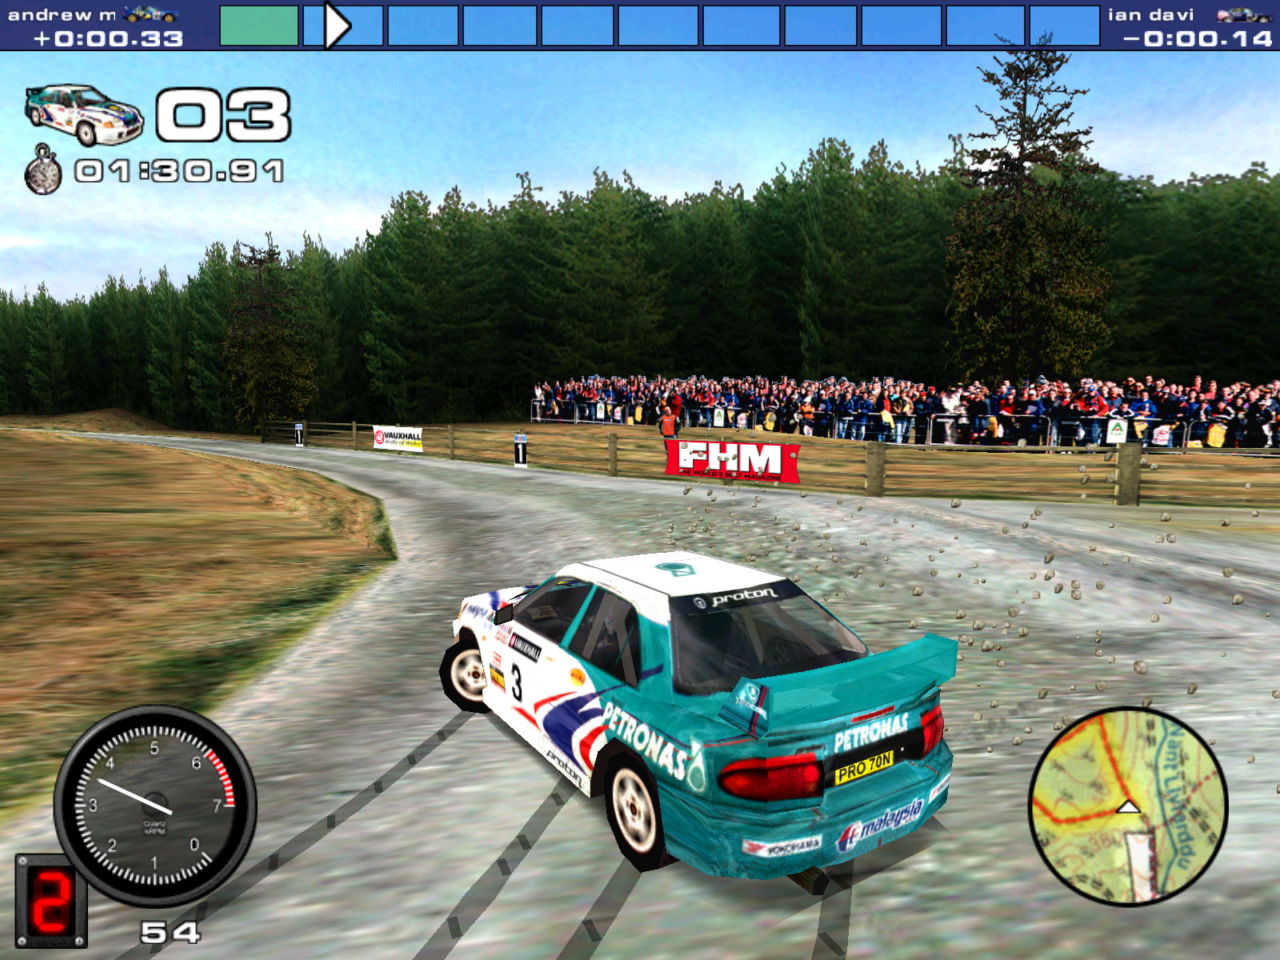 rally championship 2000 patch 5.30